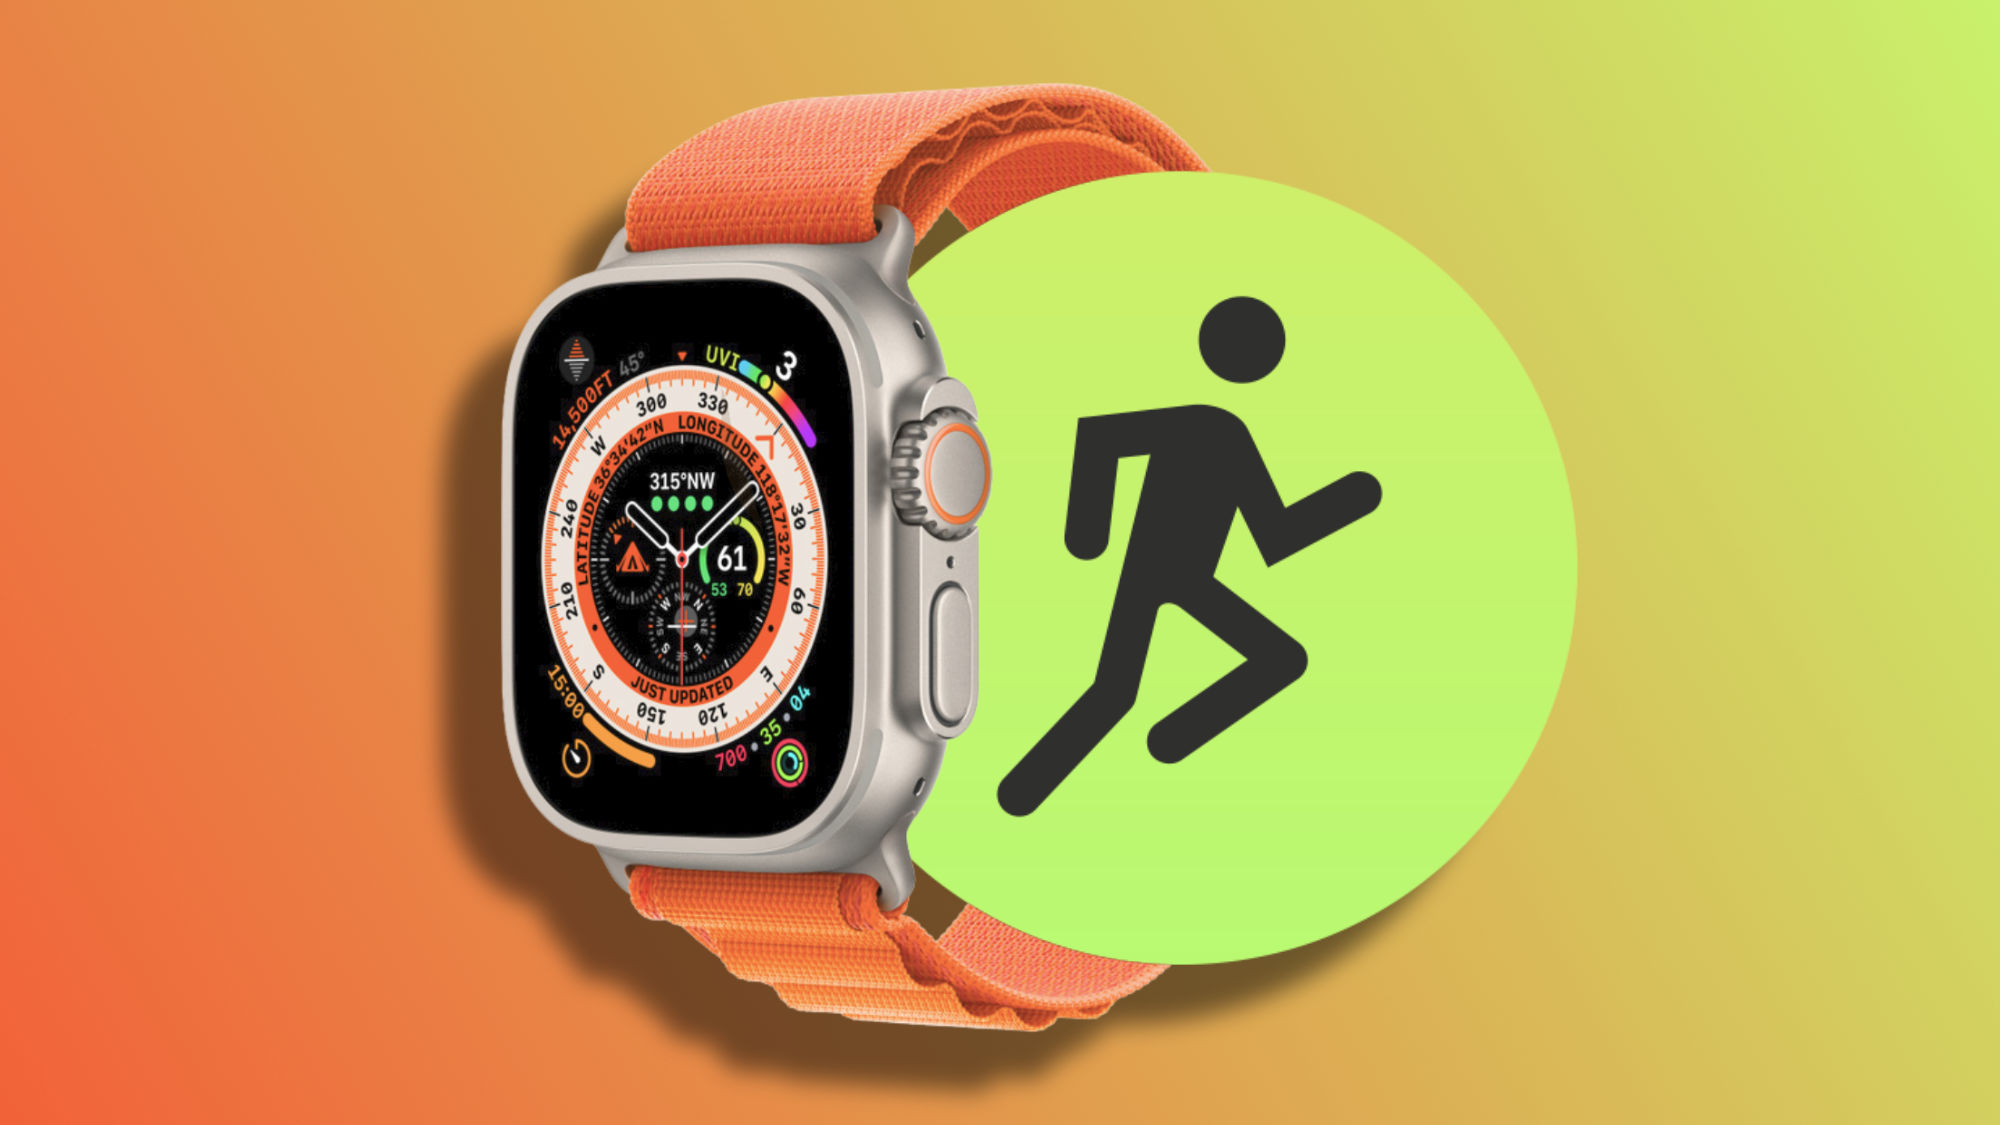 How to start and follow a workout on the Apple Watch without touching our watch